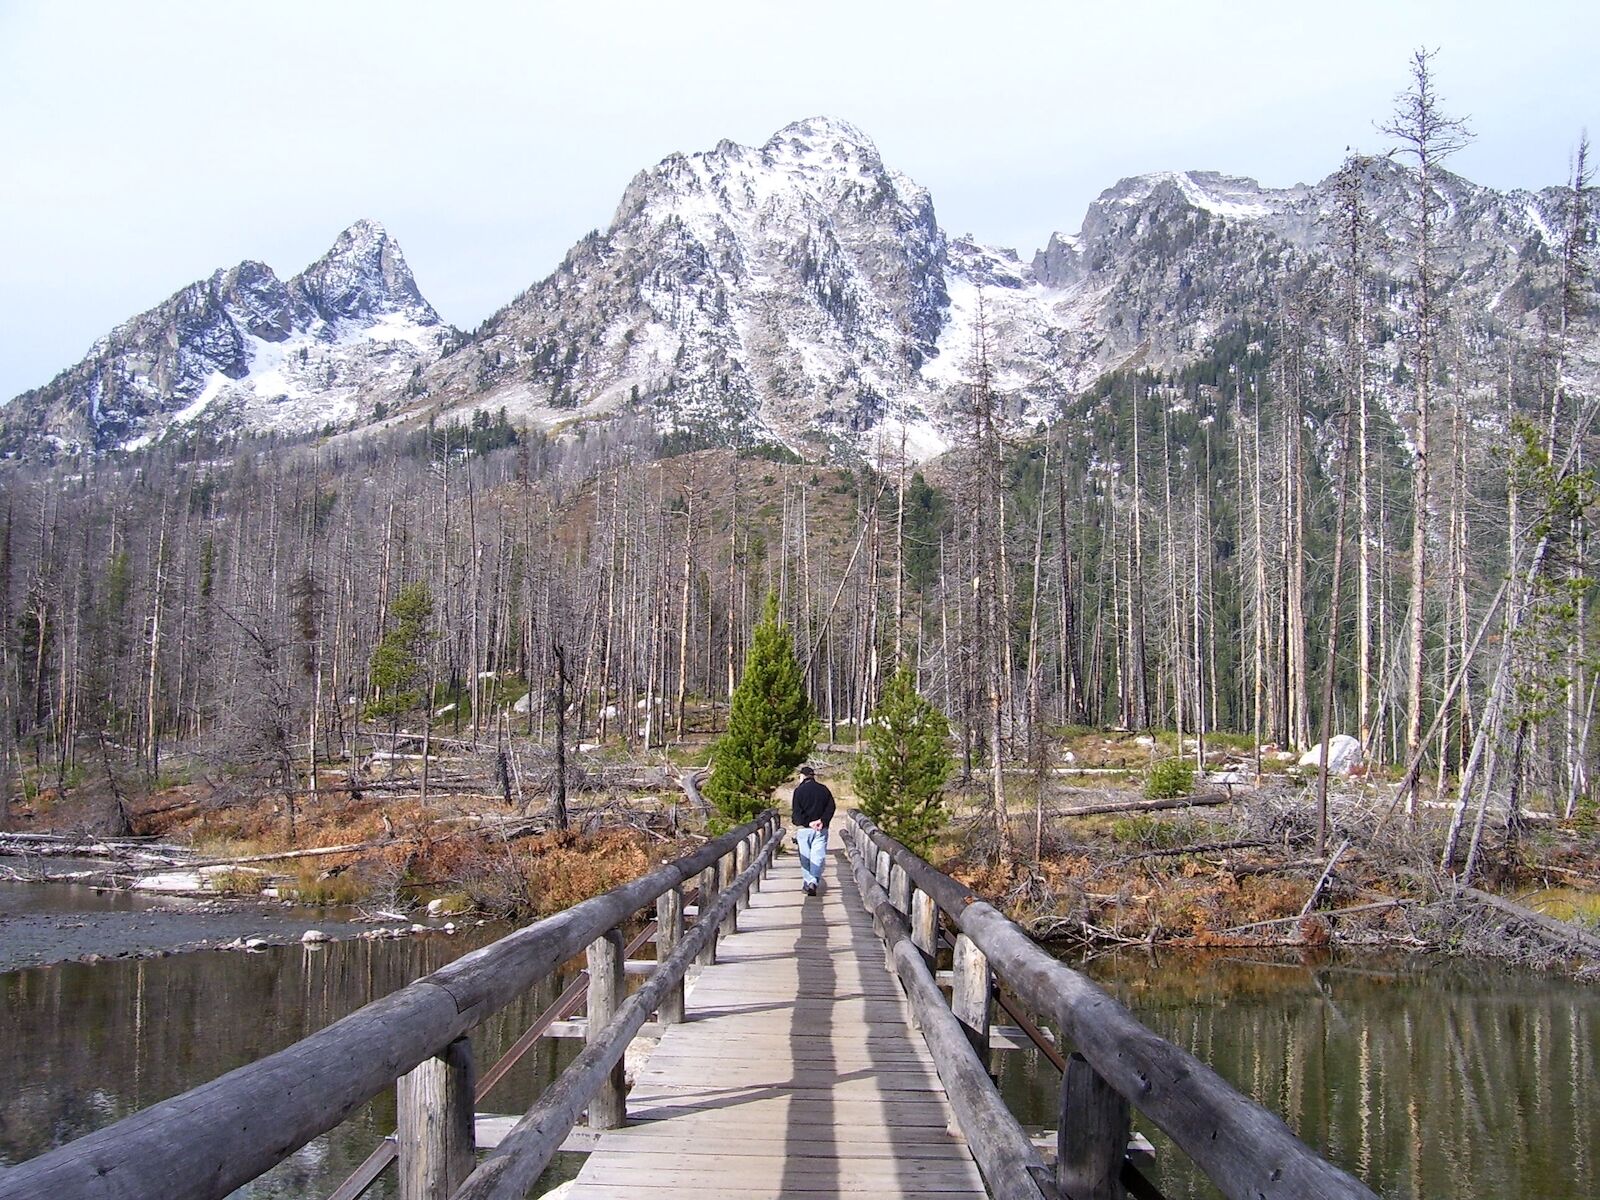 String Lake Bridge - for which you do not need a 2022 national park permit